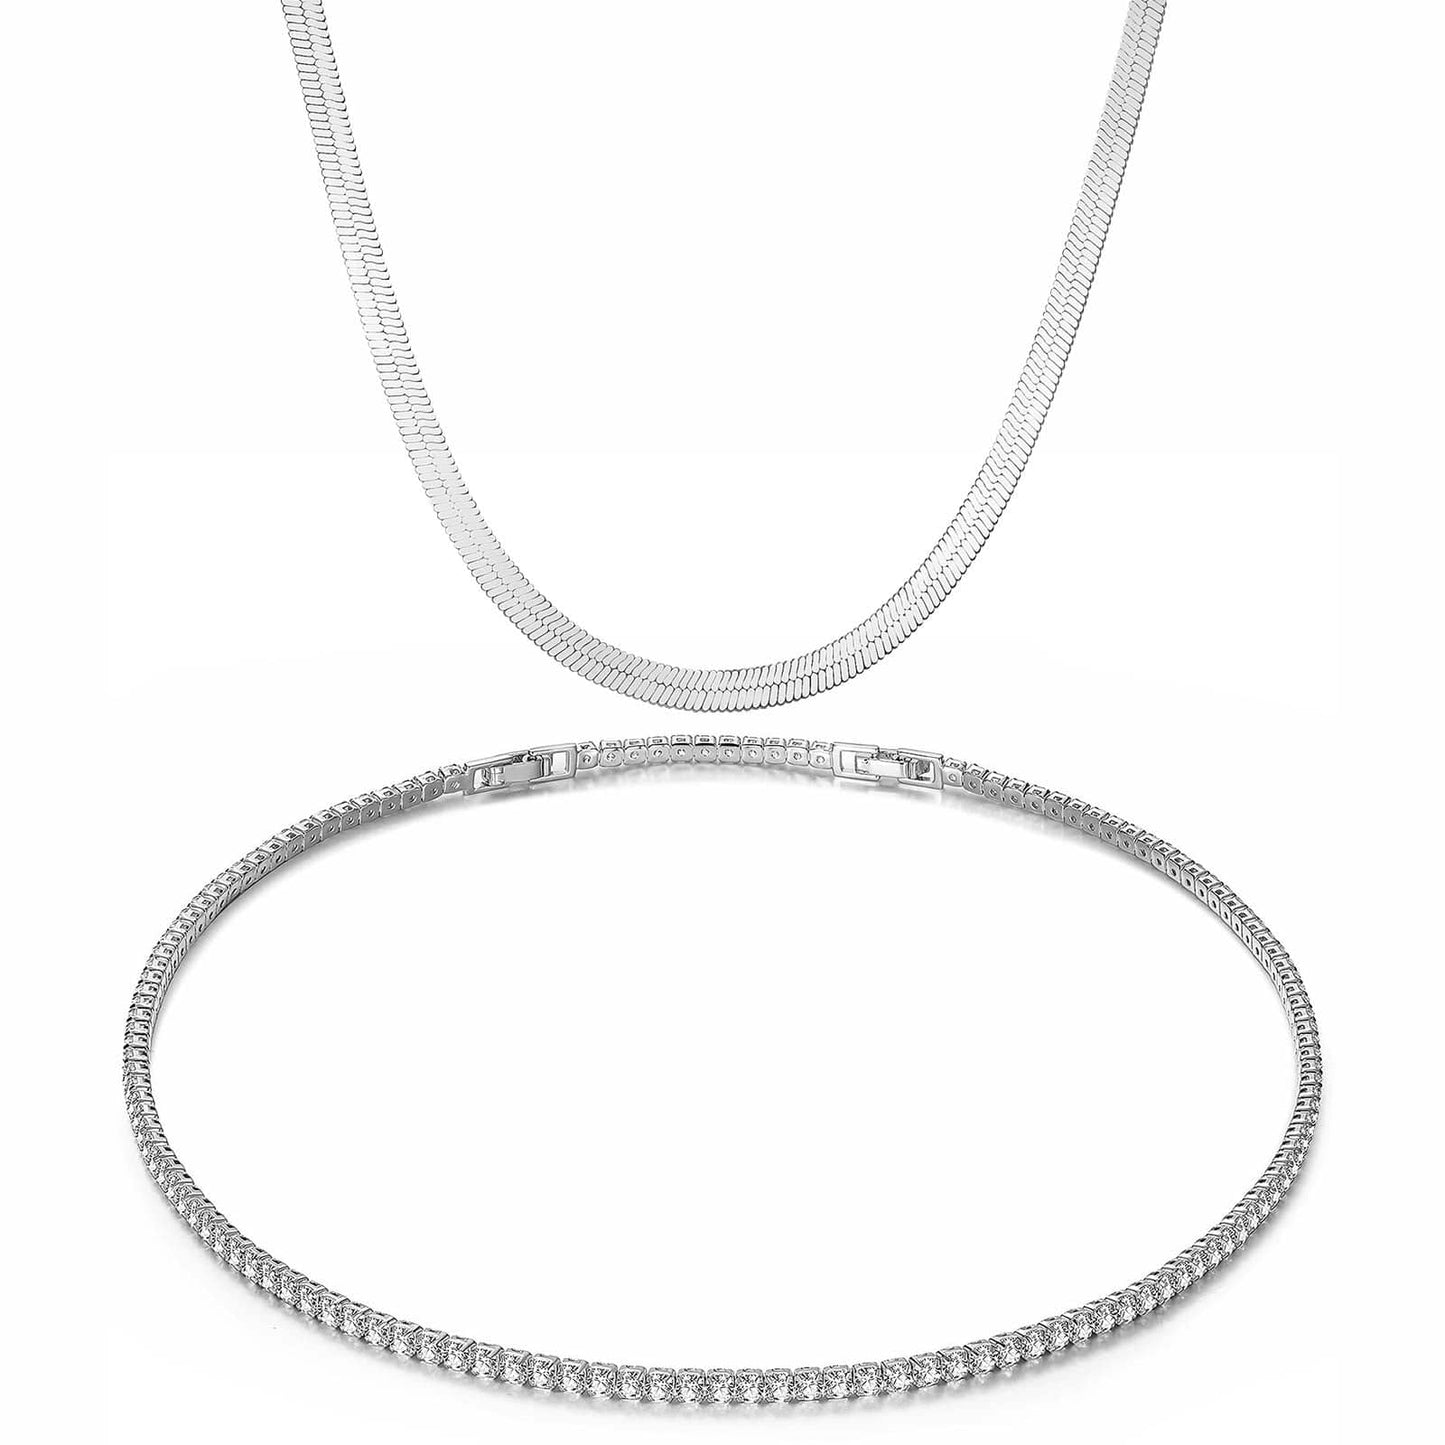 Sterling Silver Layered Necklaces Set: Flat Snake Chain and Tennis Chain Necklace Set In White Gold Plated